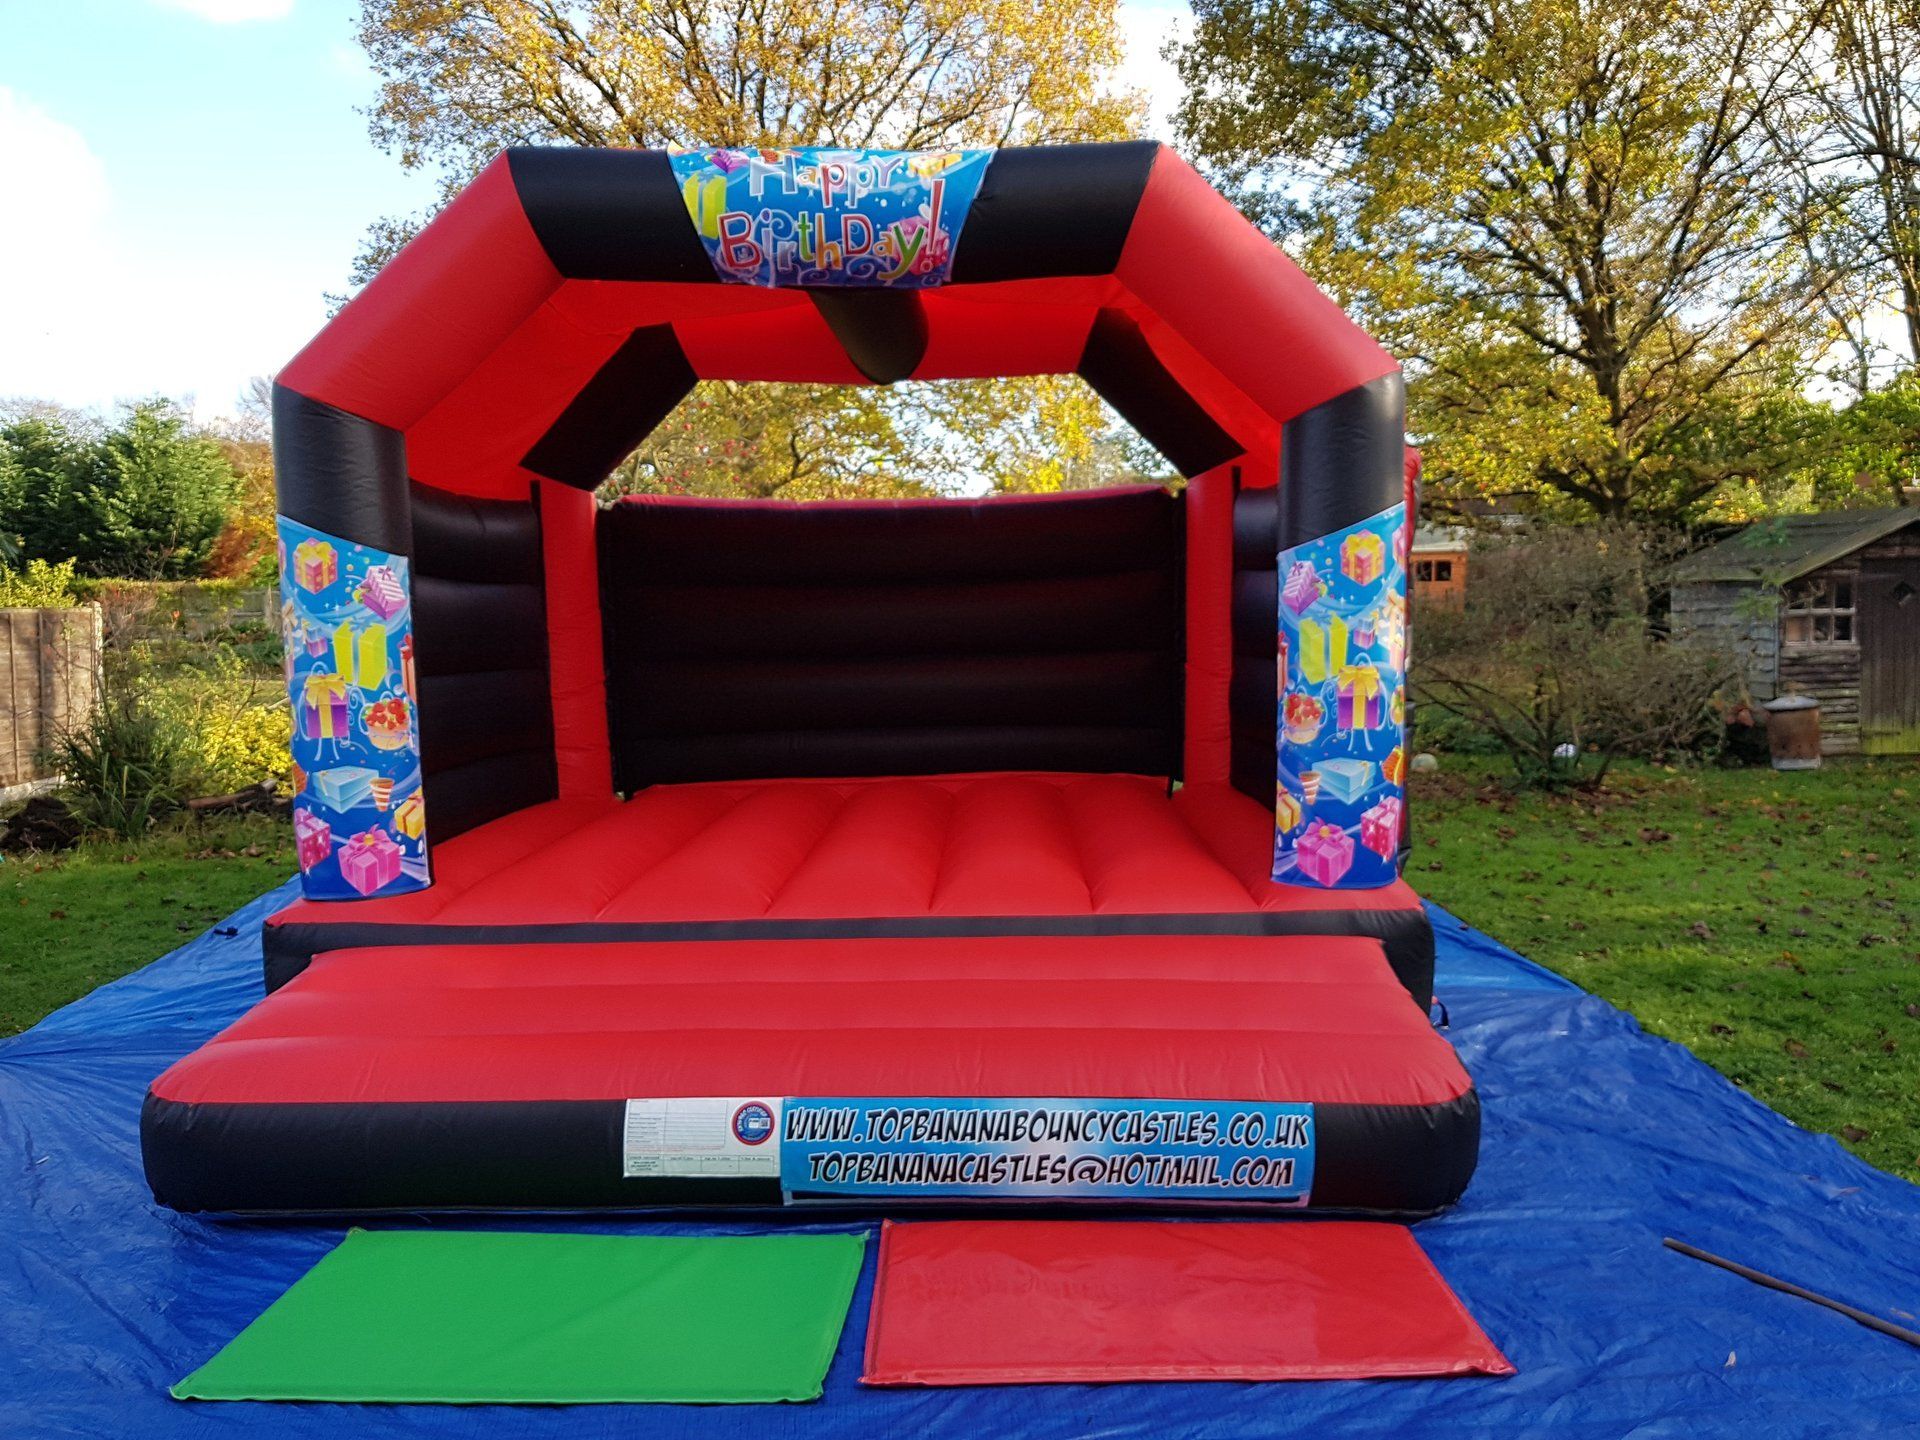 red and black adult bouncy castle with birthday artwork